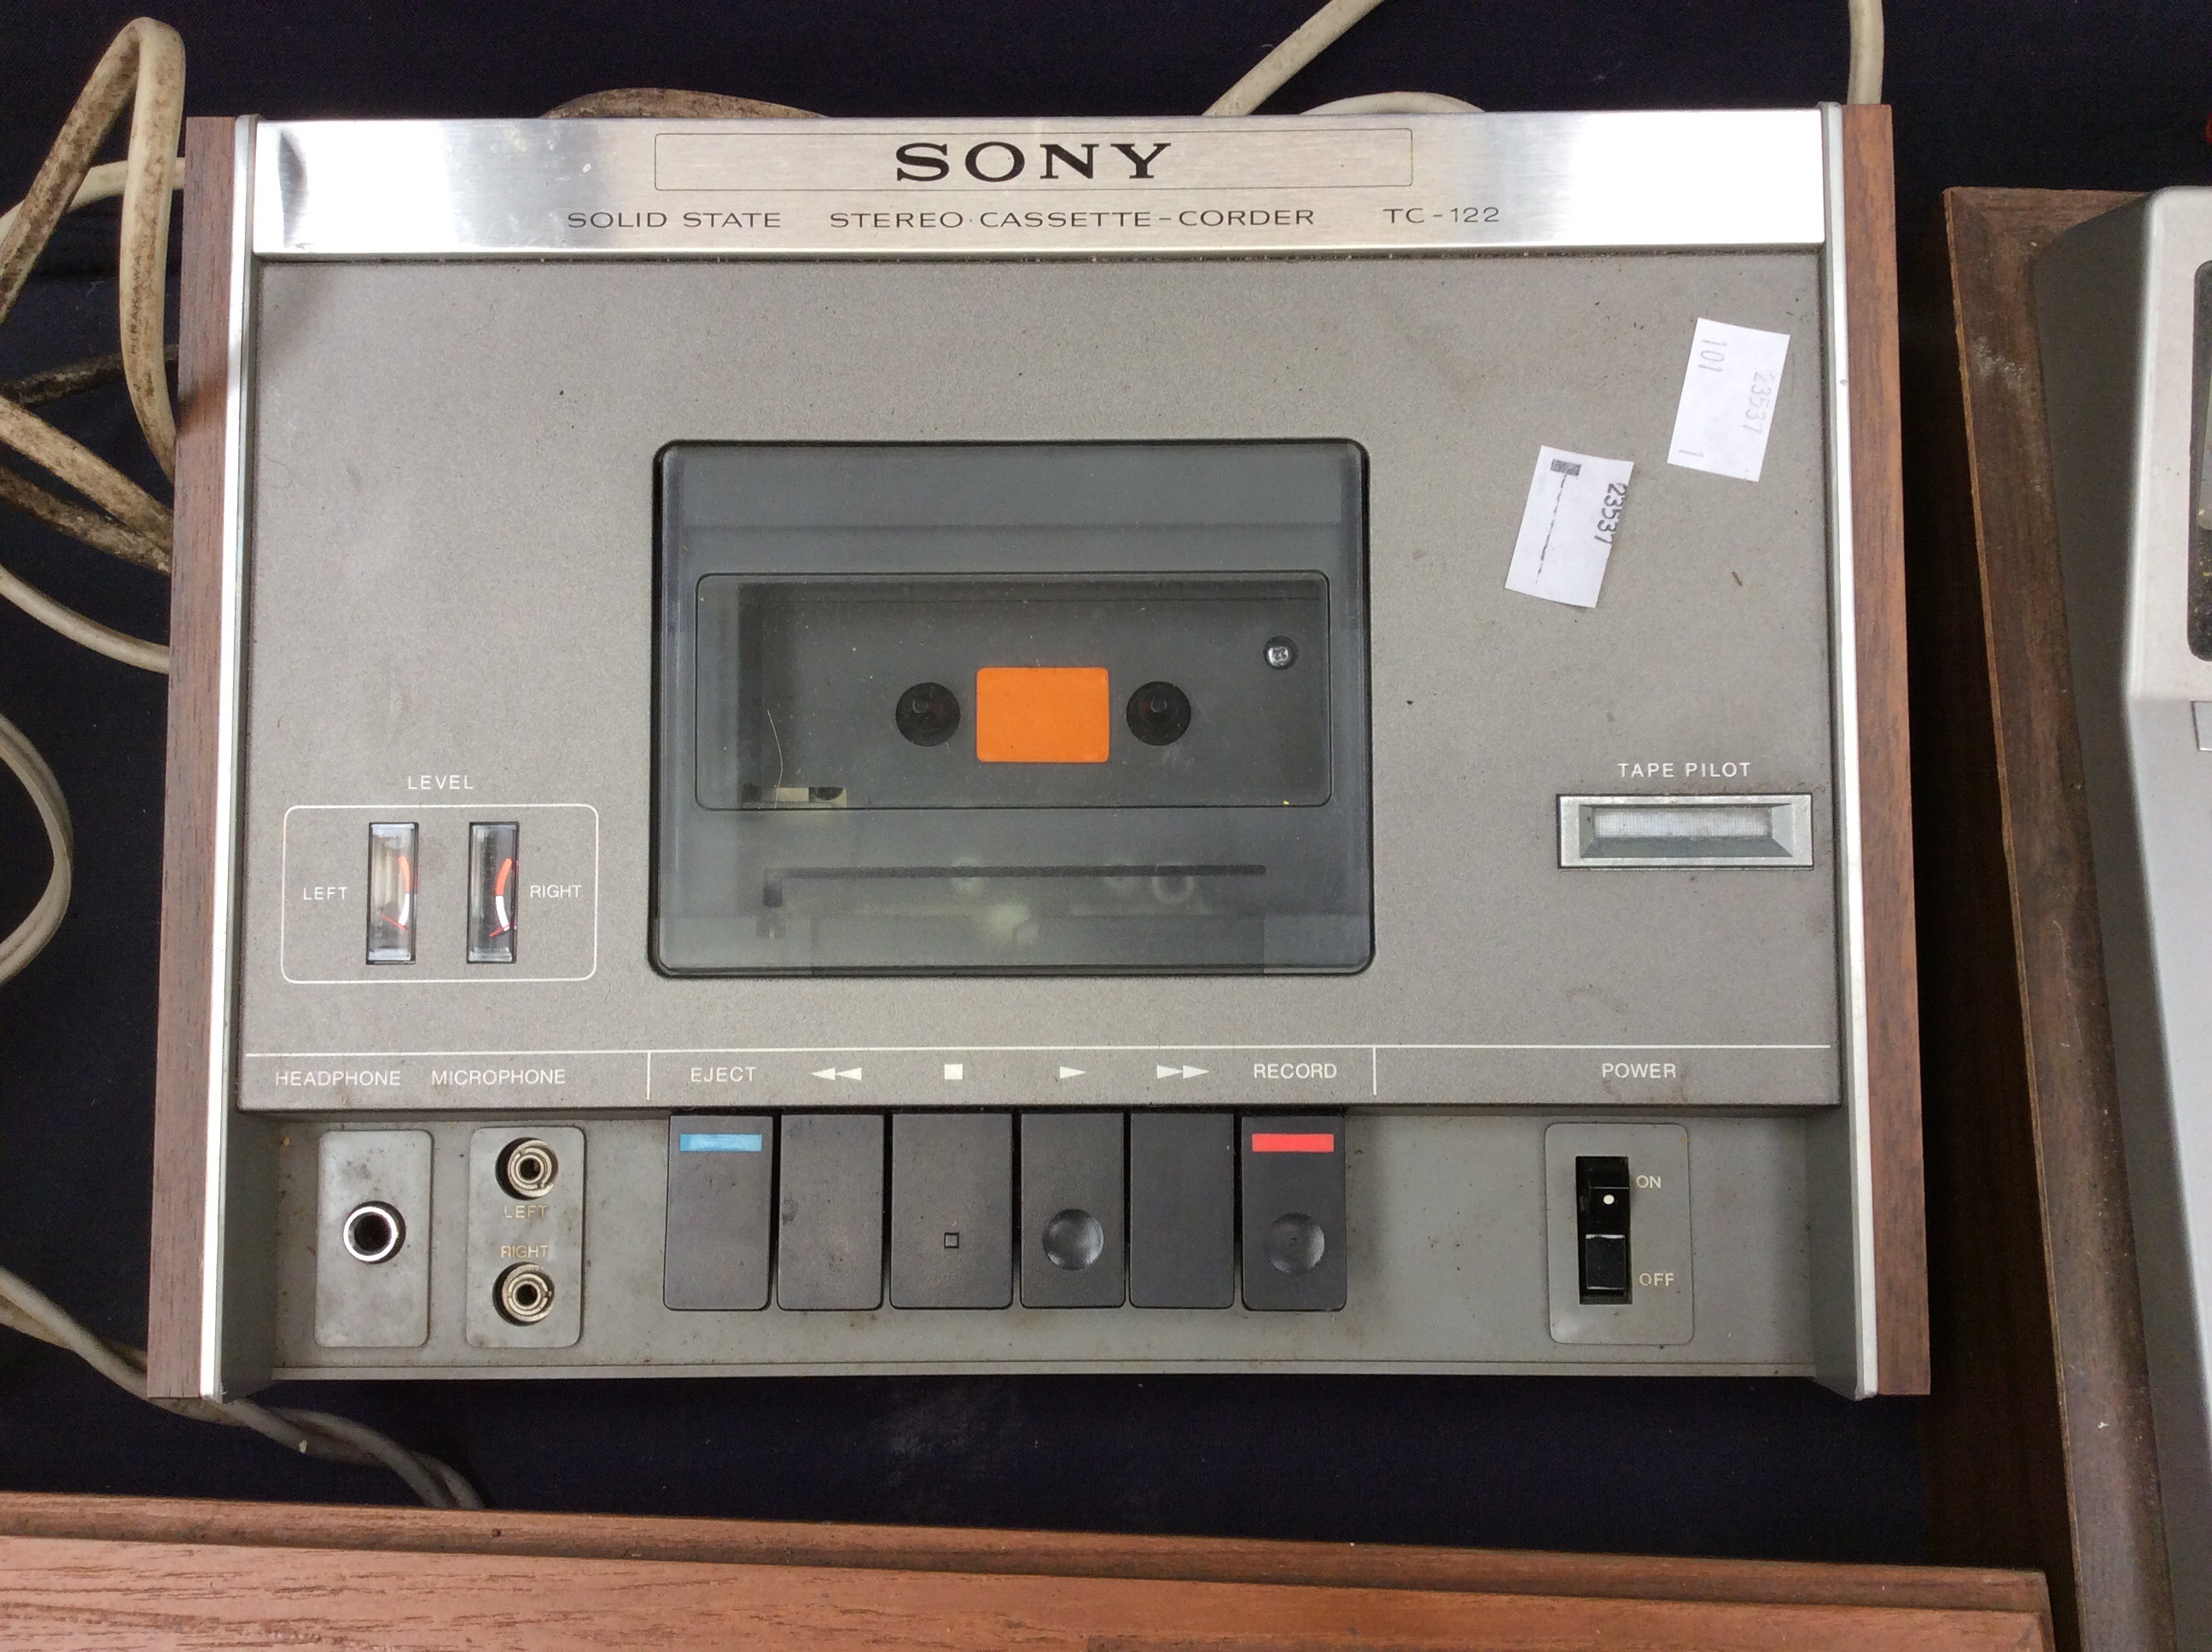 A vintage Super Mario game Nintendo Donkey Kong along with Sony tape decs and record player. - Image 3 of 4